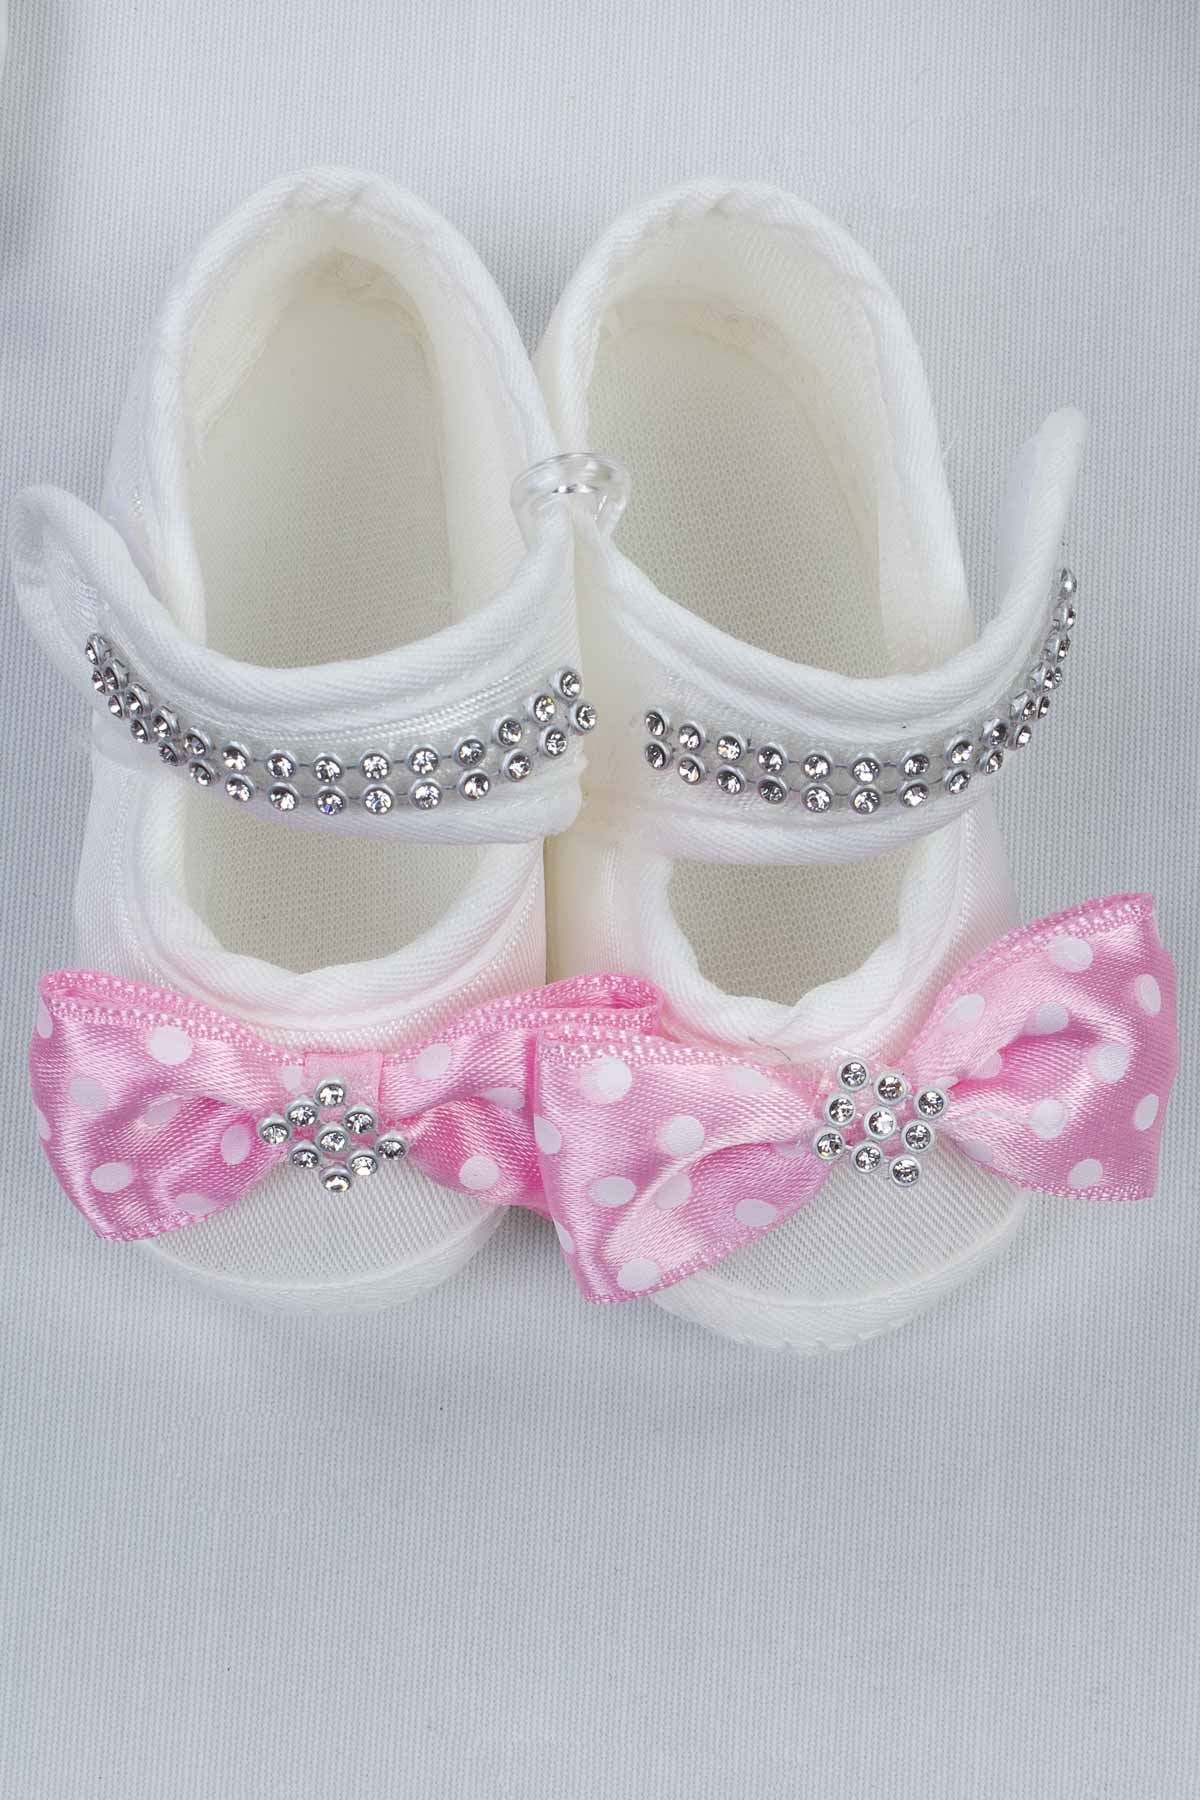 Pink Puerperal Crown Slippers and Baby Booties Bandana Set